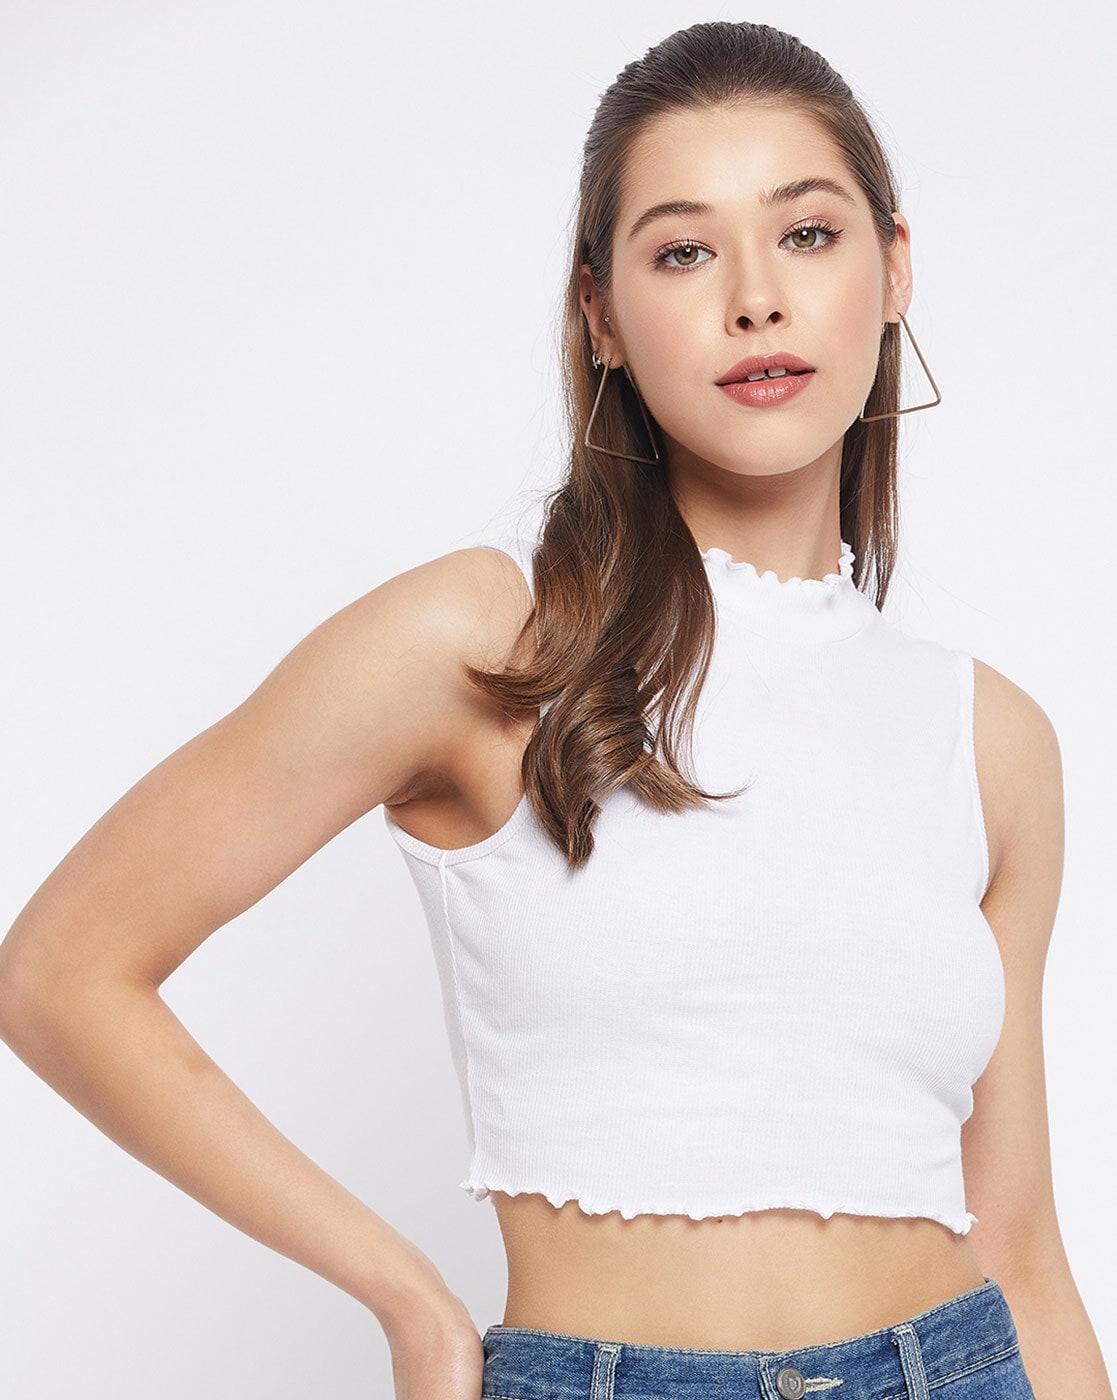 Buy Le Bourgeois Sexy White Colour Women's Strap with adjuster Sleeveless  Vest Blouse Tank Top Online at Low Prices in India 